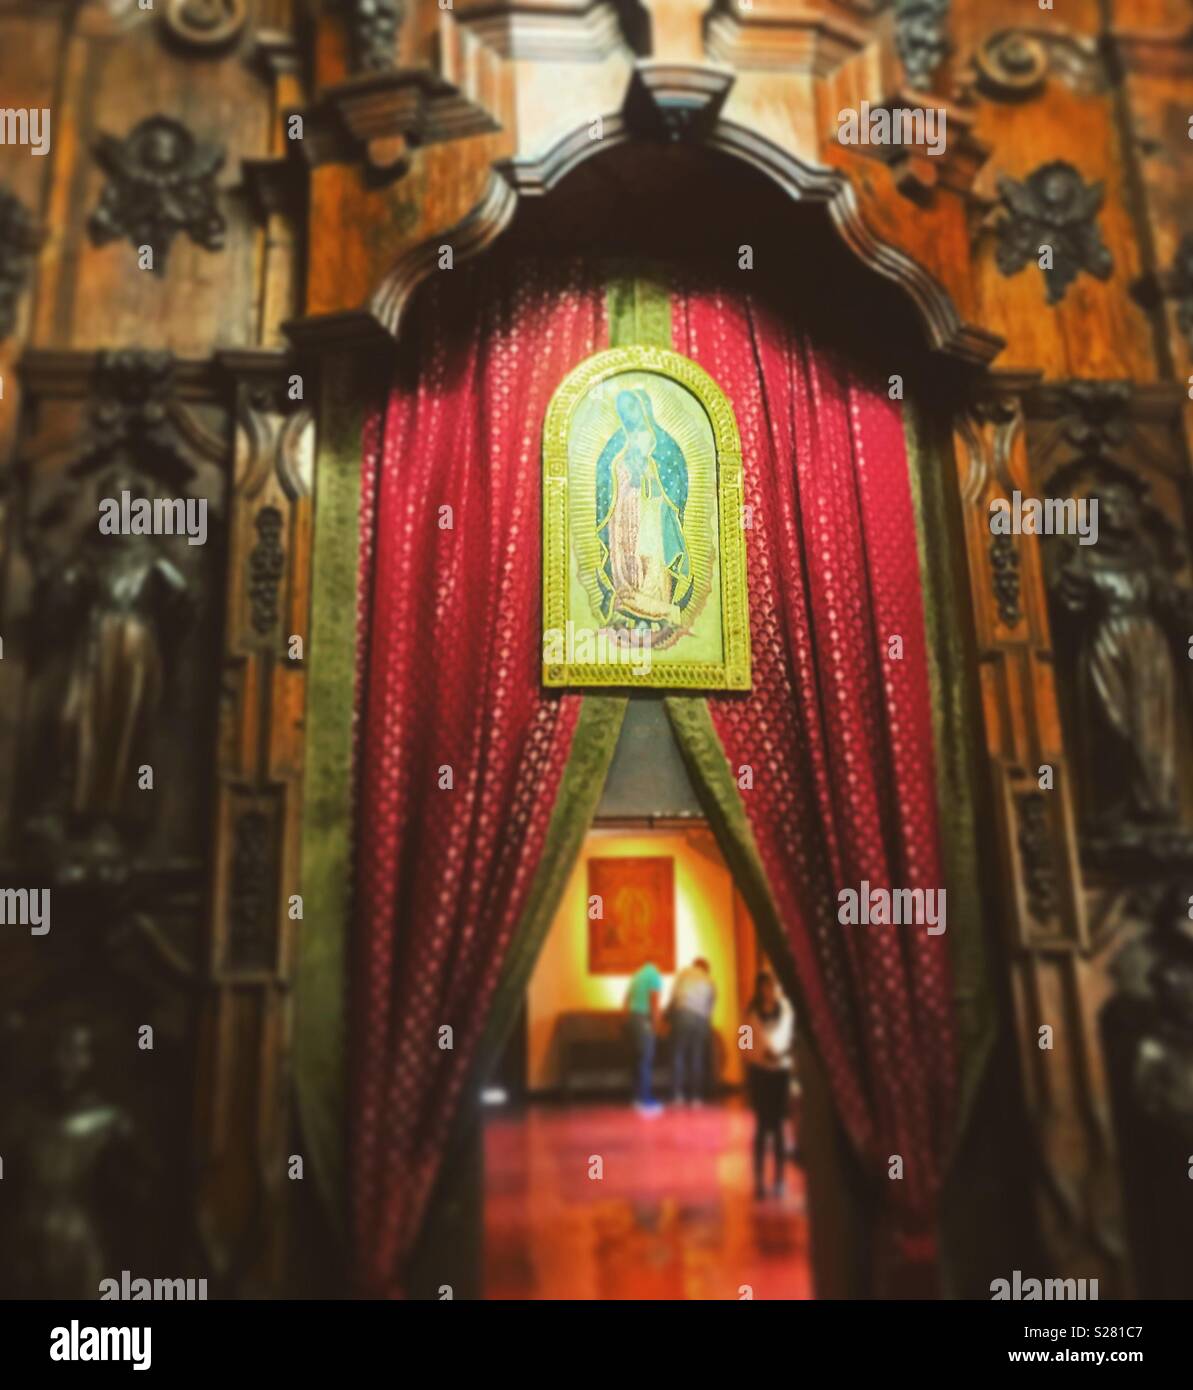 An image of Our Lady of Guadalupe is shown in a door decorated with a red curtain in the Basilica of Our Lady of Guadalupe in Mexico City, Mexico Stock Photo